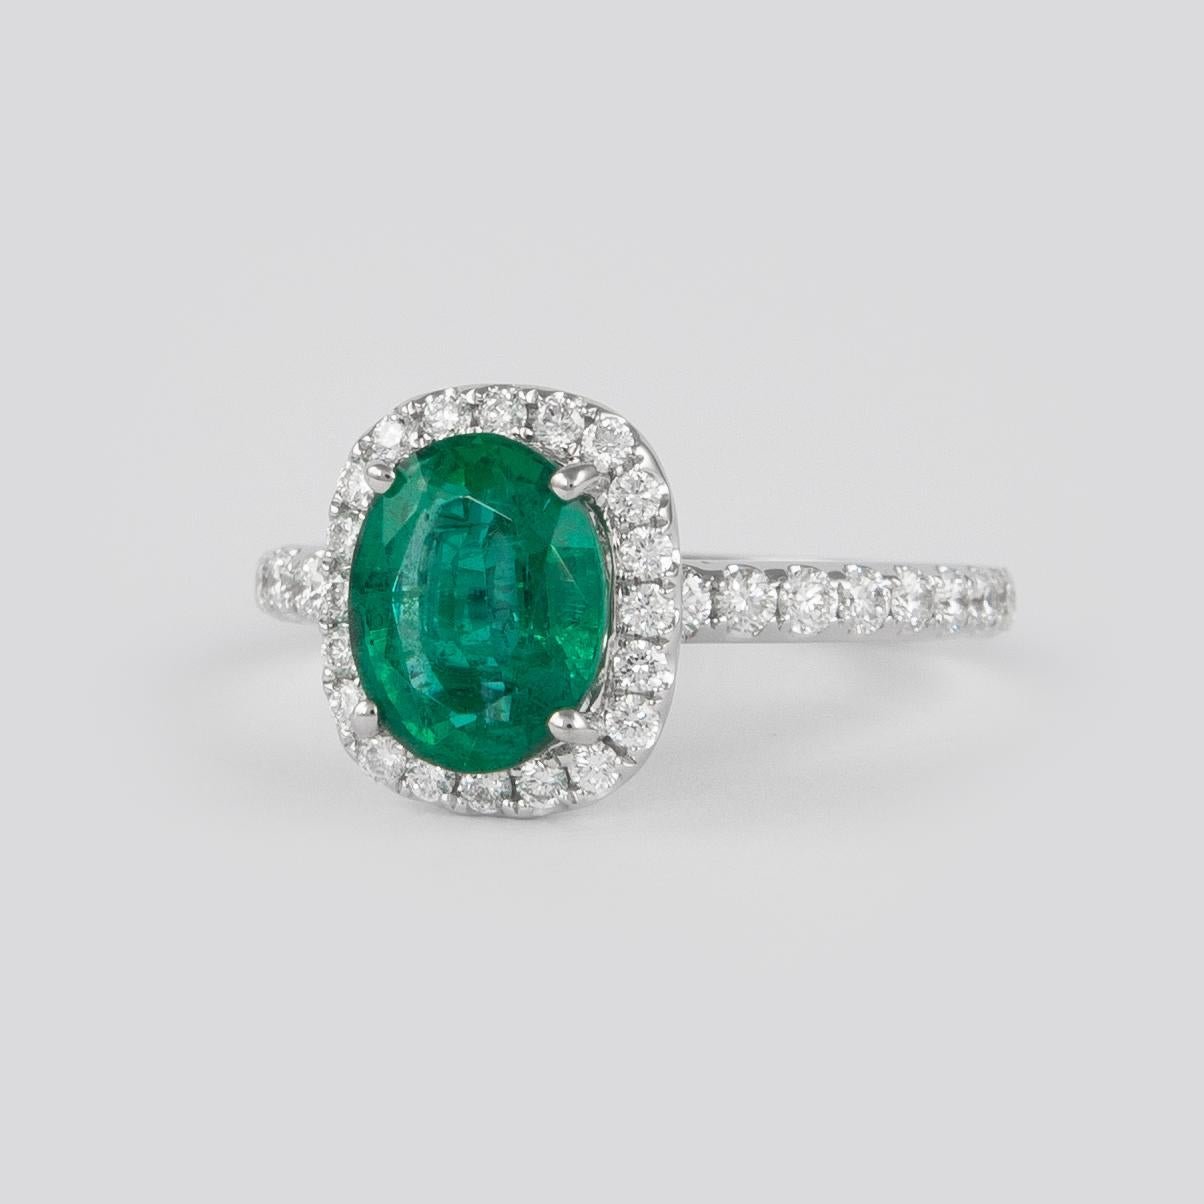 Lovely emerald with diamond halo ring. By Alexander of Beverly Hills.
1.72 carat oval emerald complimented with 54 round brilliant diamonds, 0.75ct. Approximately G/H color and VS2/SI1 clarity. 2.47ct total gemstone weight, in 18k white gold.